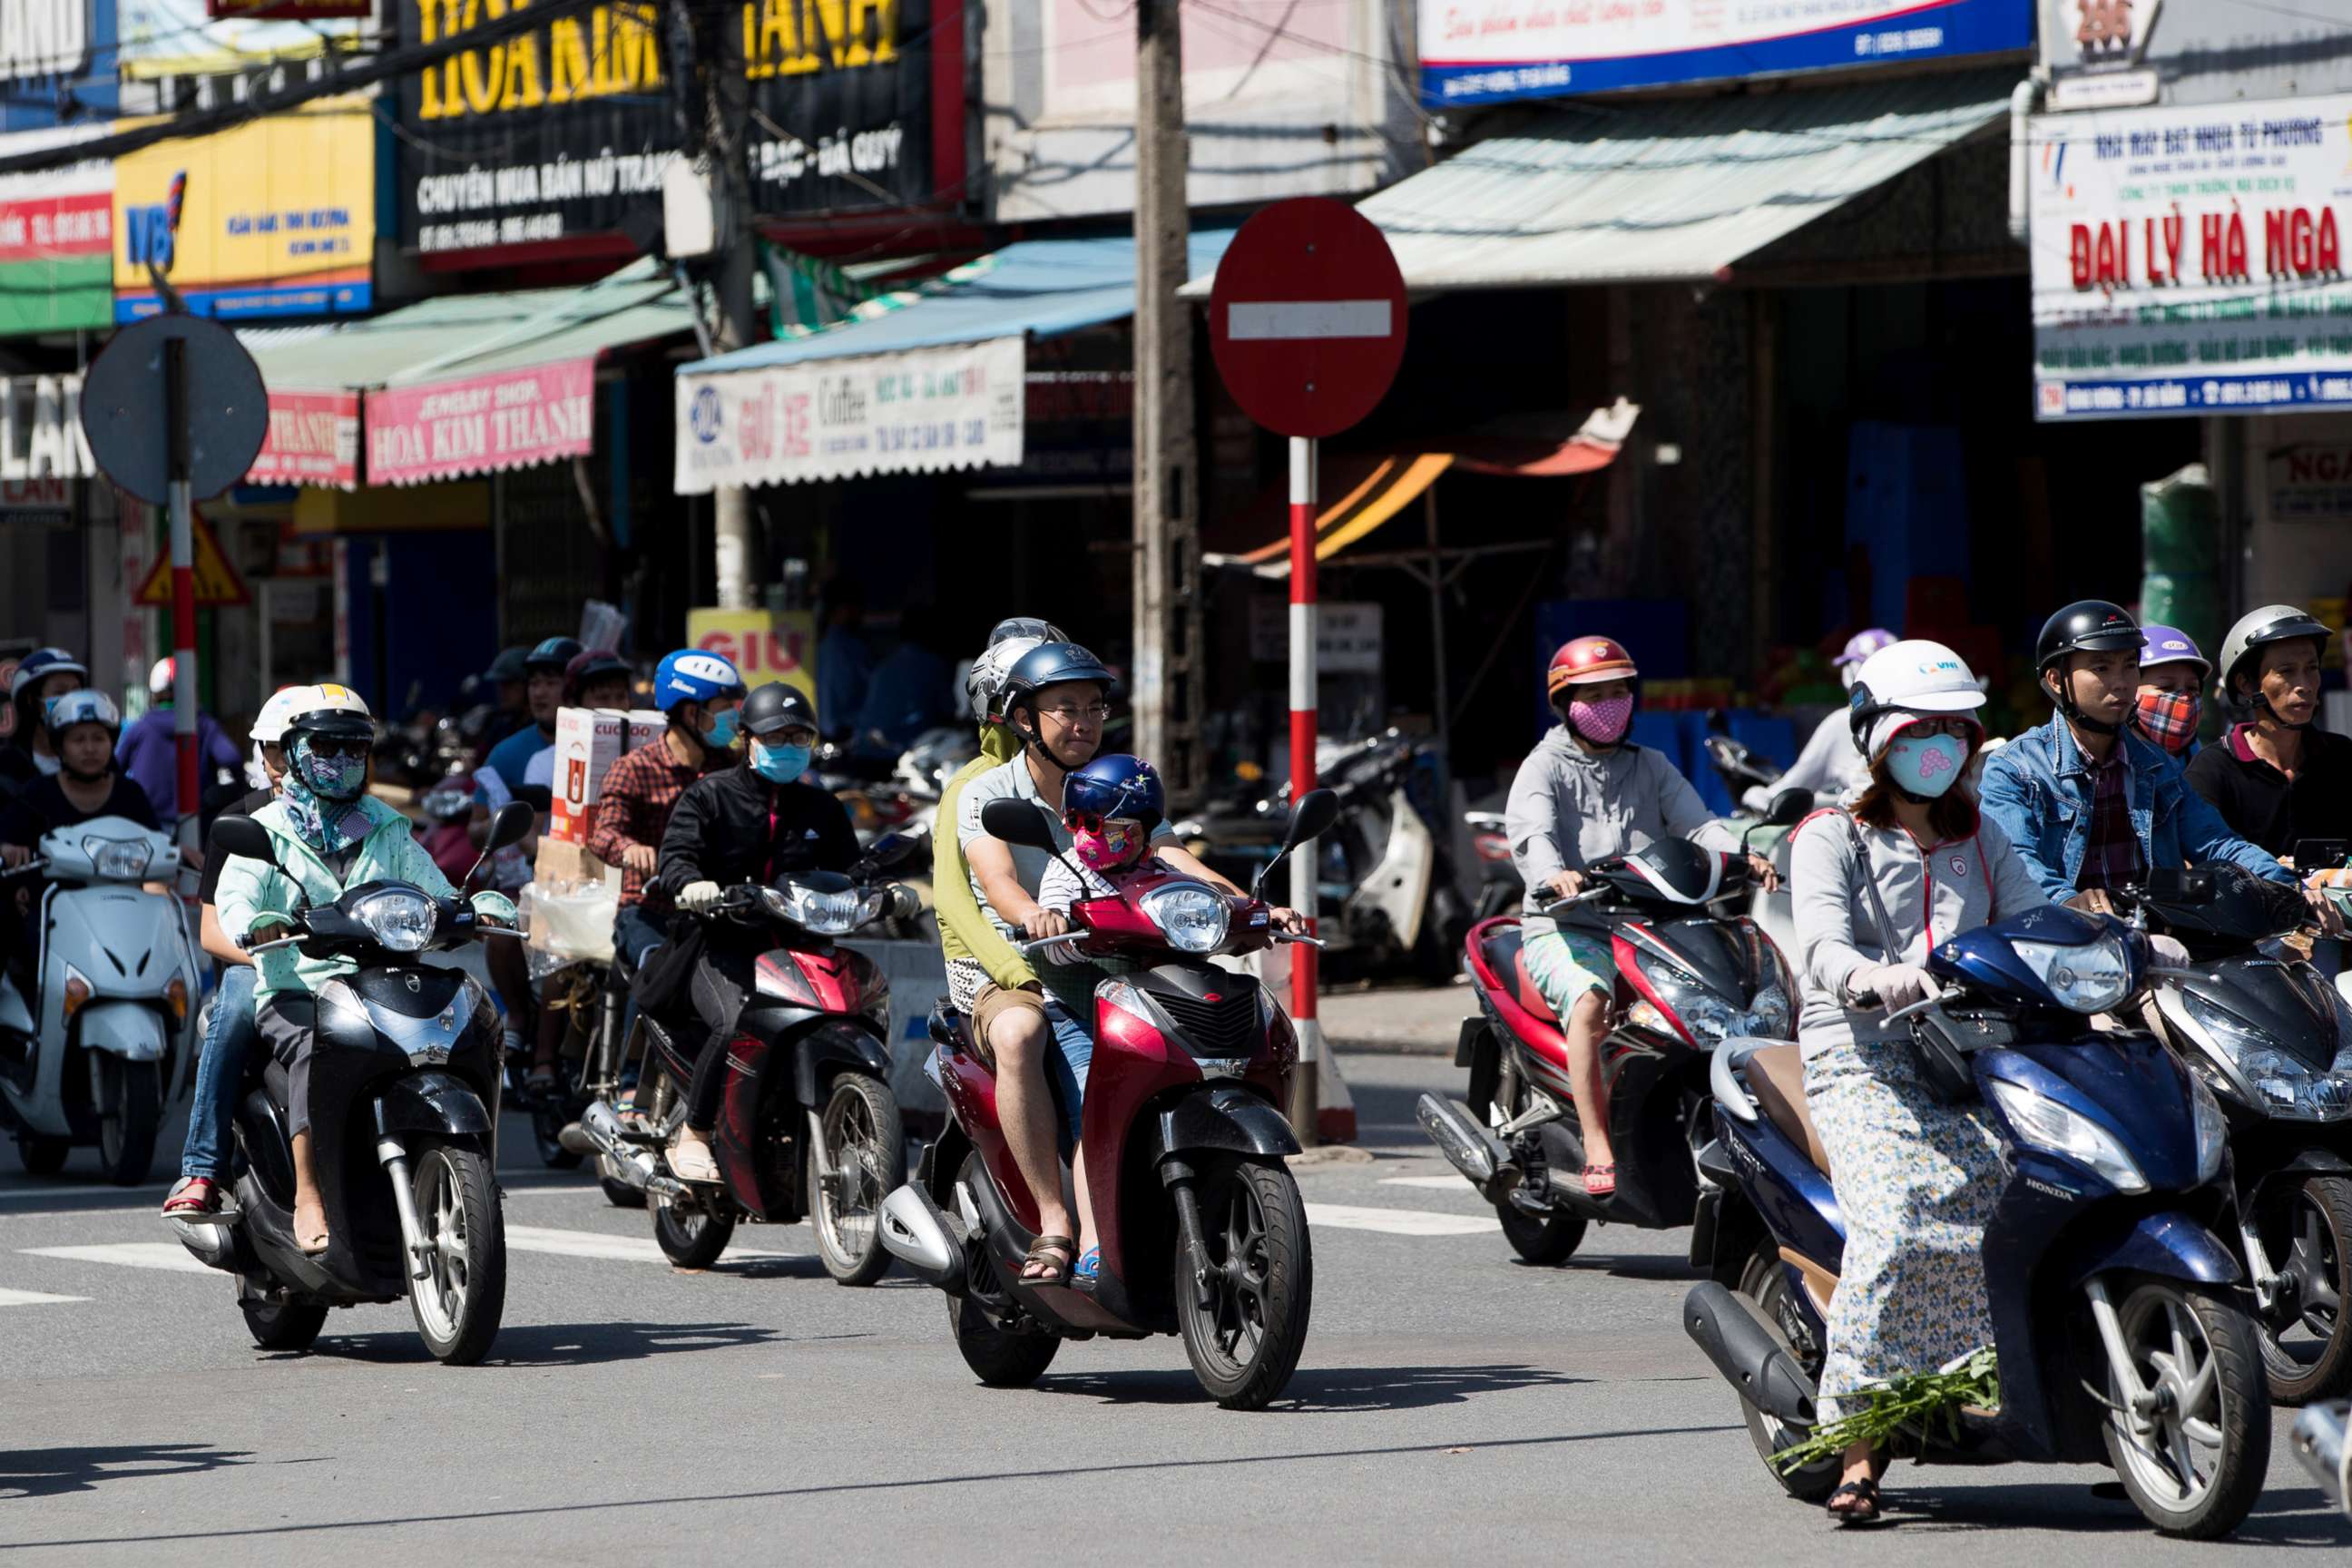 PHOTO: Motorcyclists travel along a road in Da Nang, Vietnam in this Nov. 11, 2017 file photo.